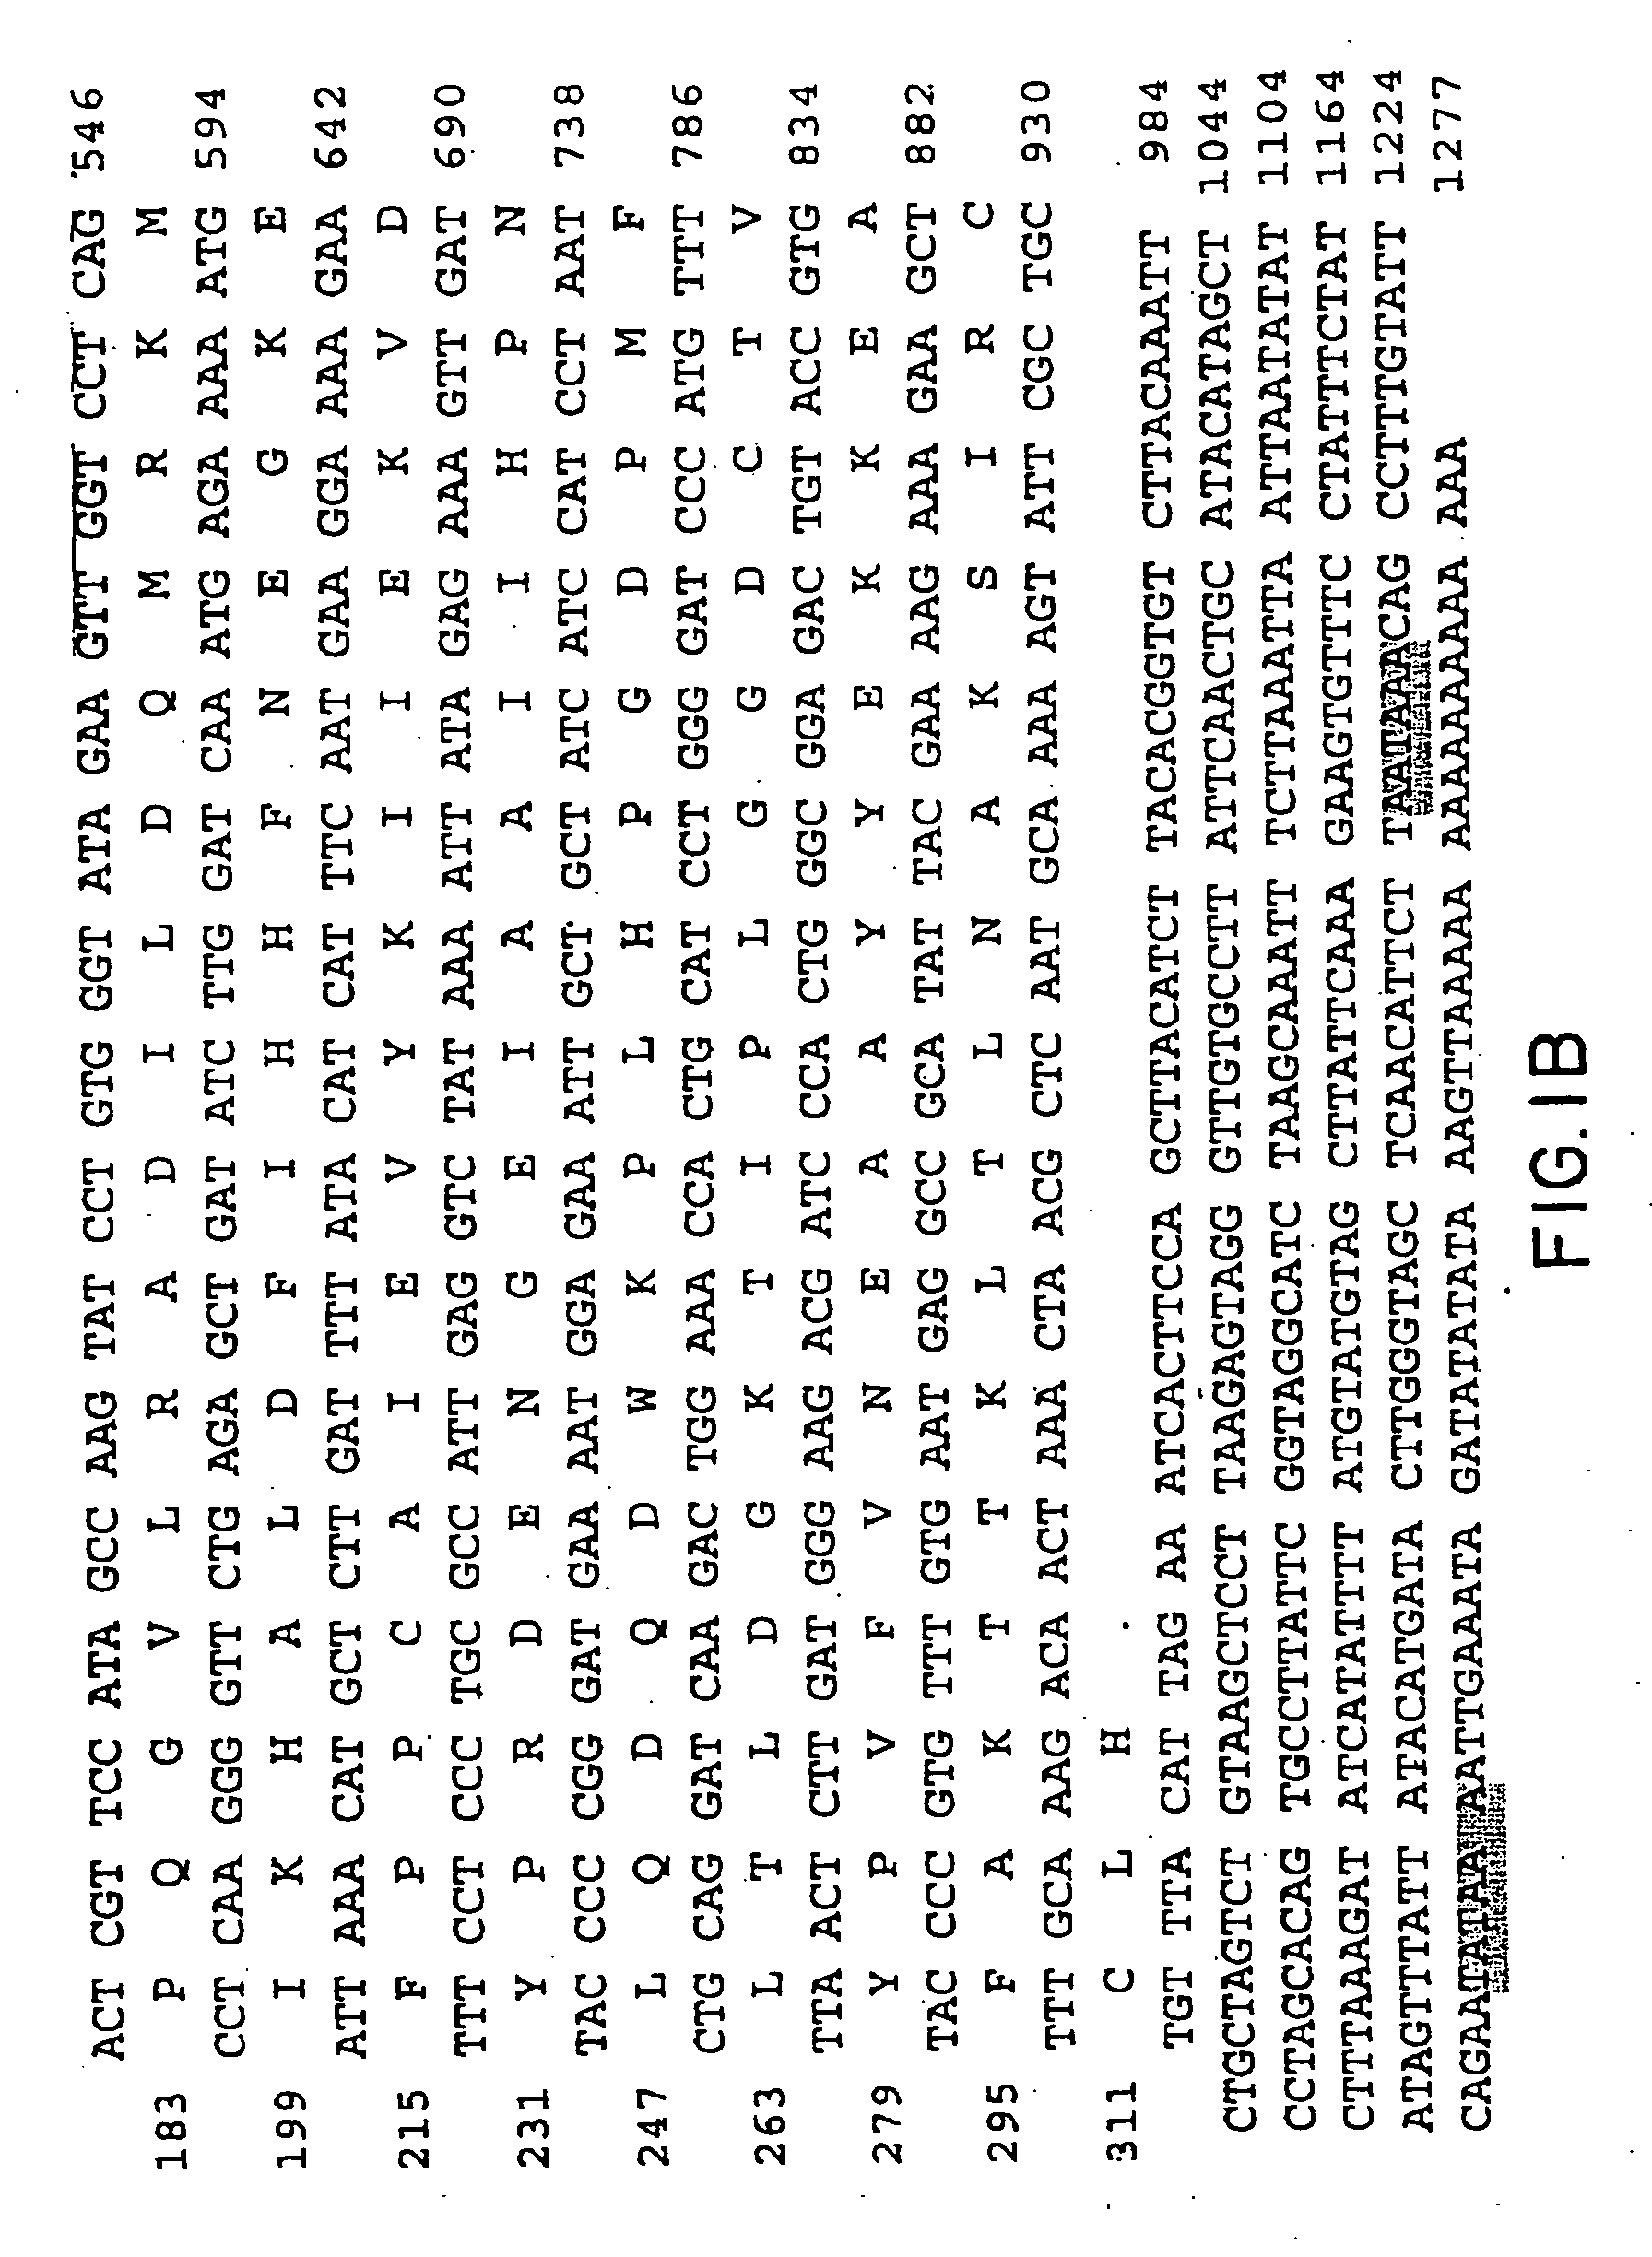 Aspartoacylase gene, protein, and methods of screening for mutations associated with canavan disease